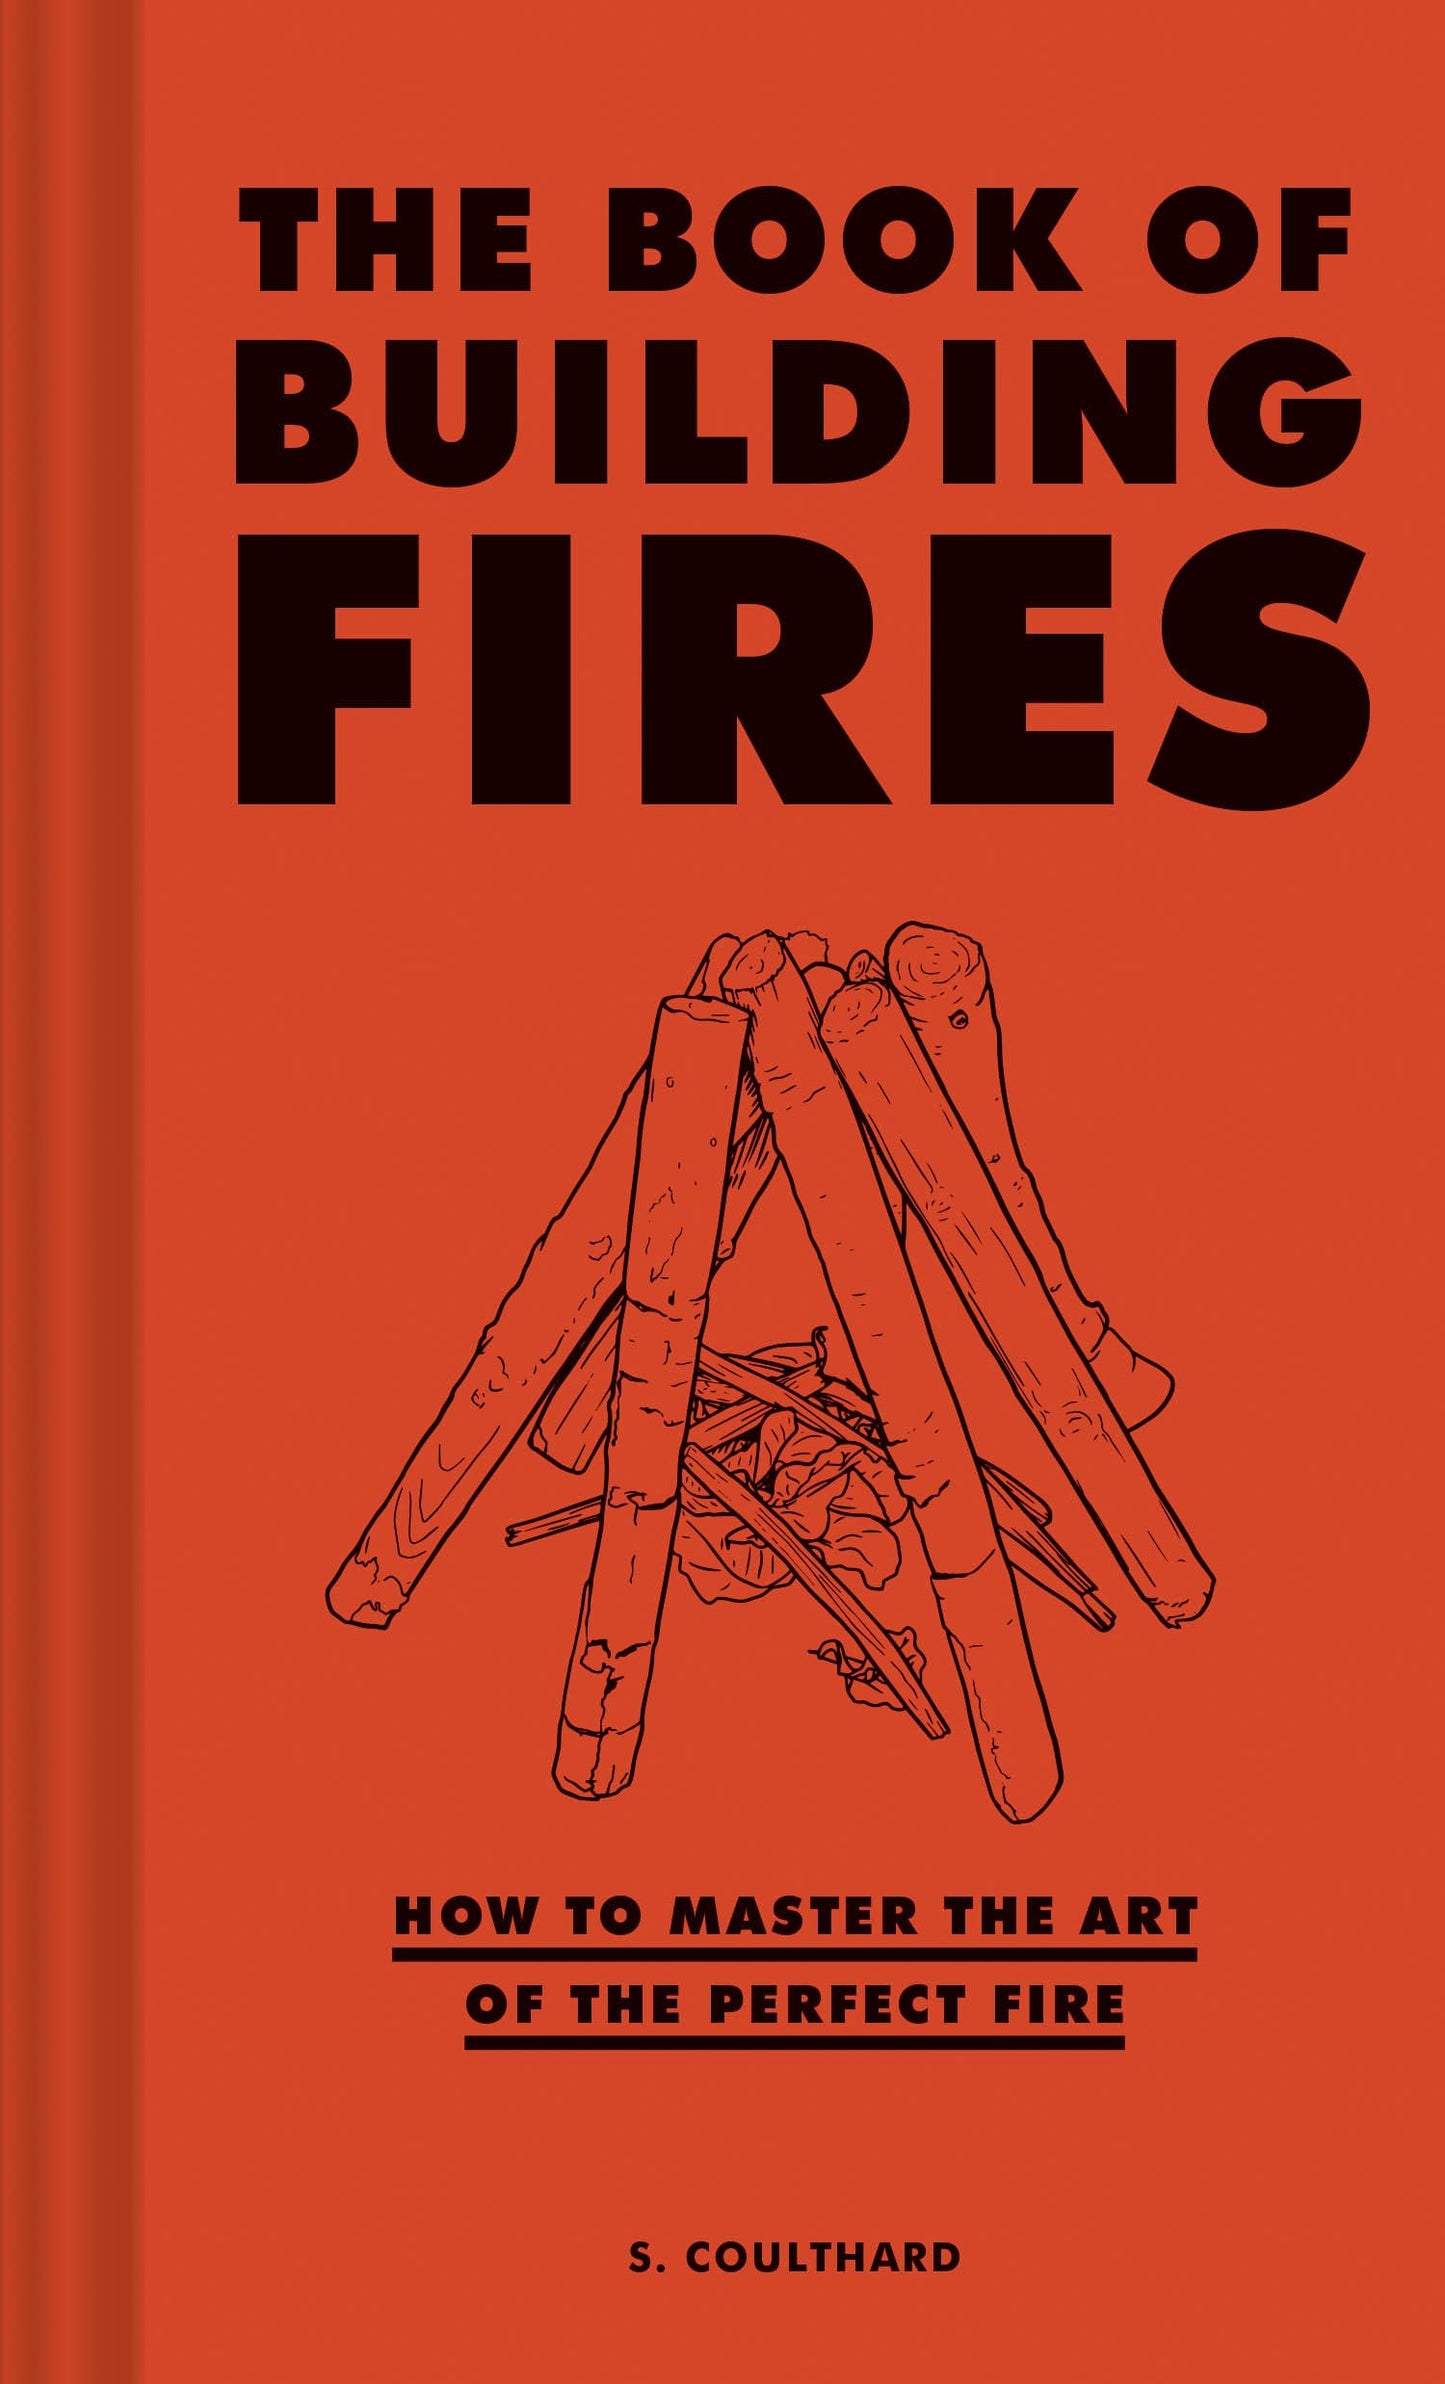 Book of Building Fires: How to Master the Art of the Perfect Fire (Survival Books for Adults, Camping Books, Survival Guide Book)